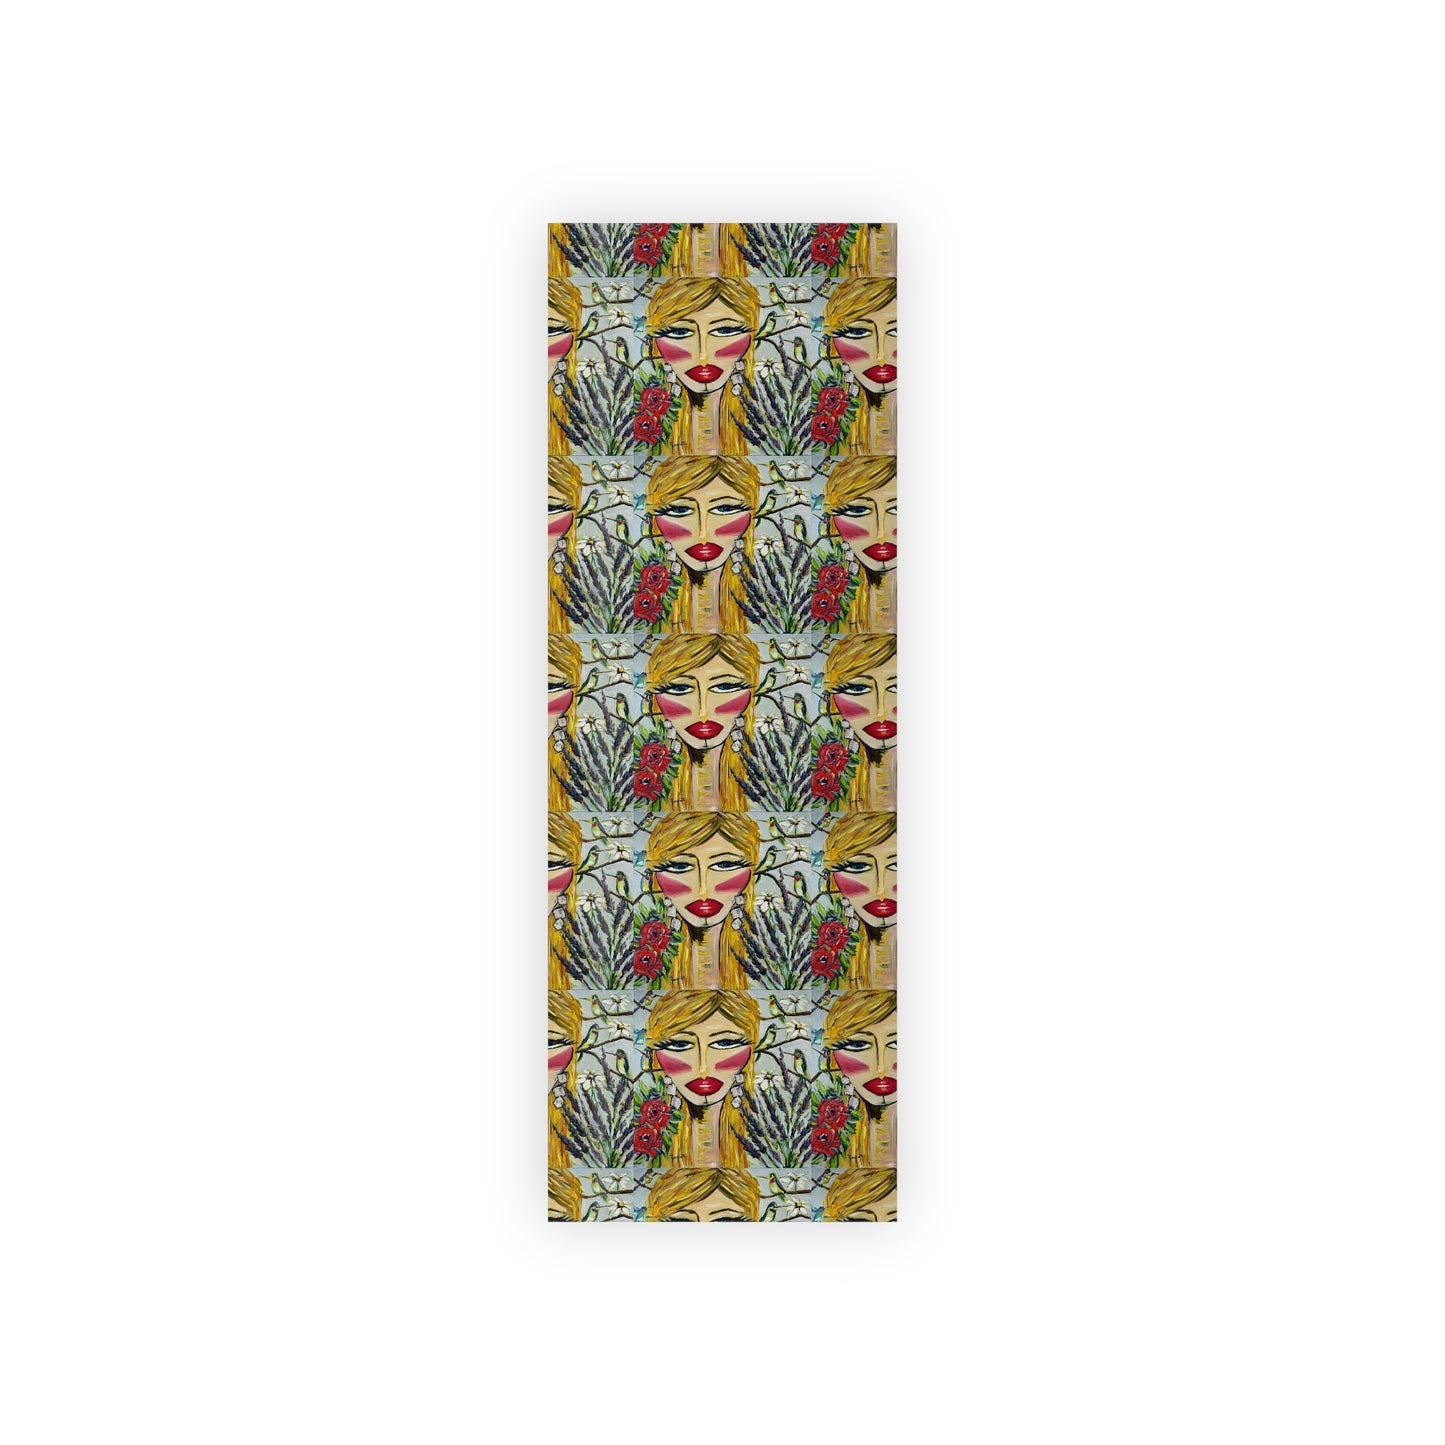 Hummingbird Lady Gift Wrapping Paper  1pc